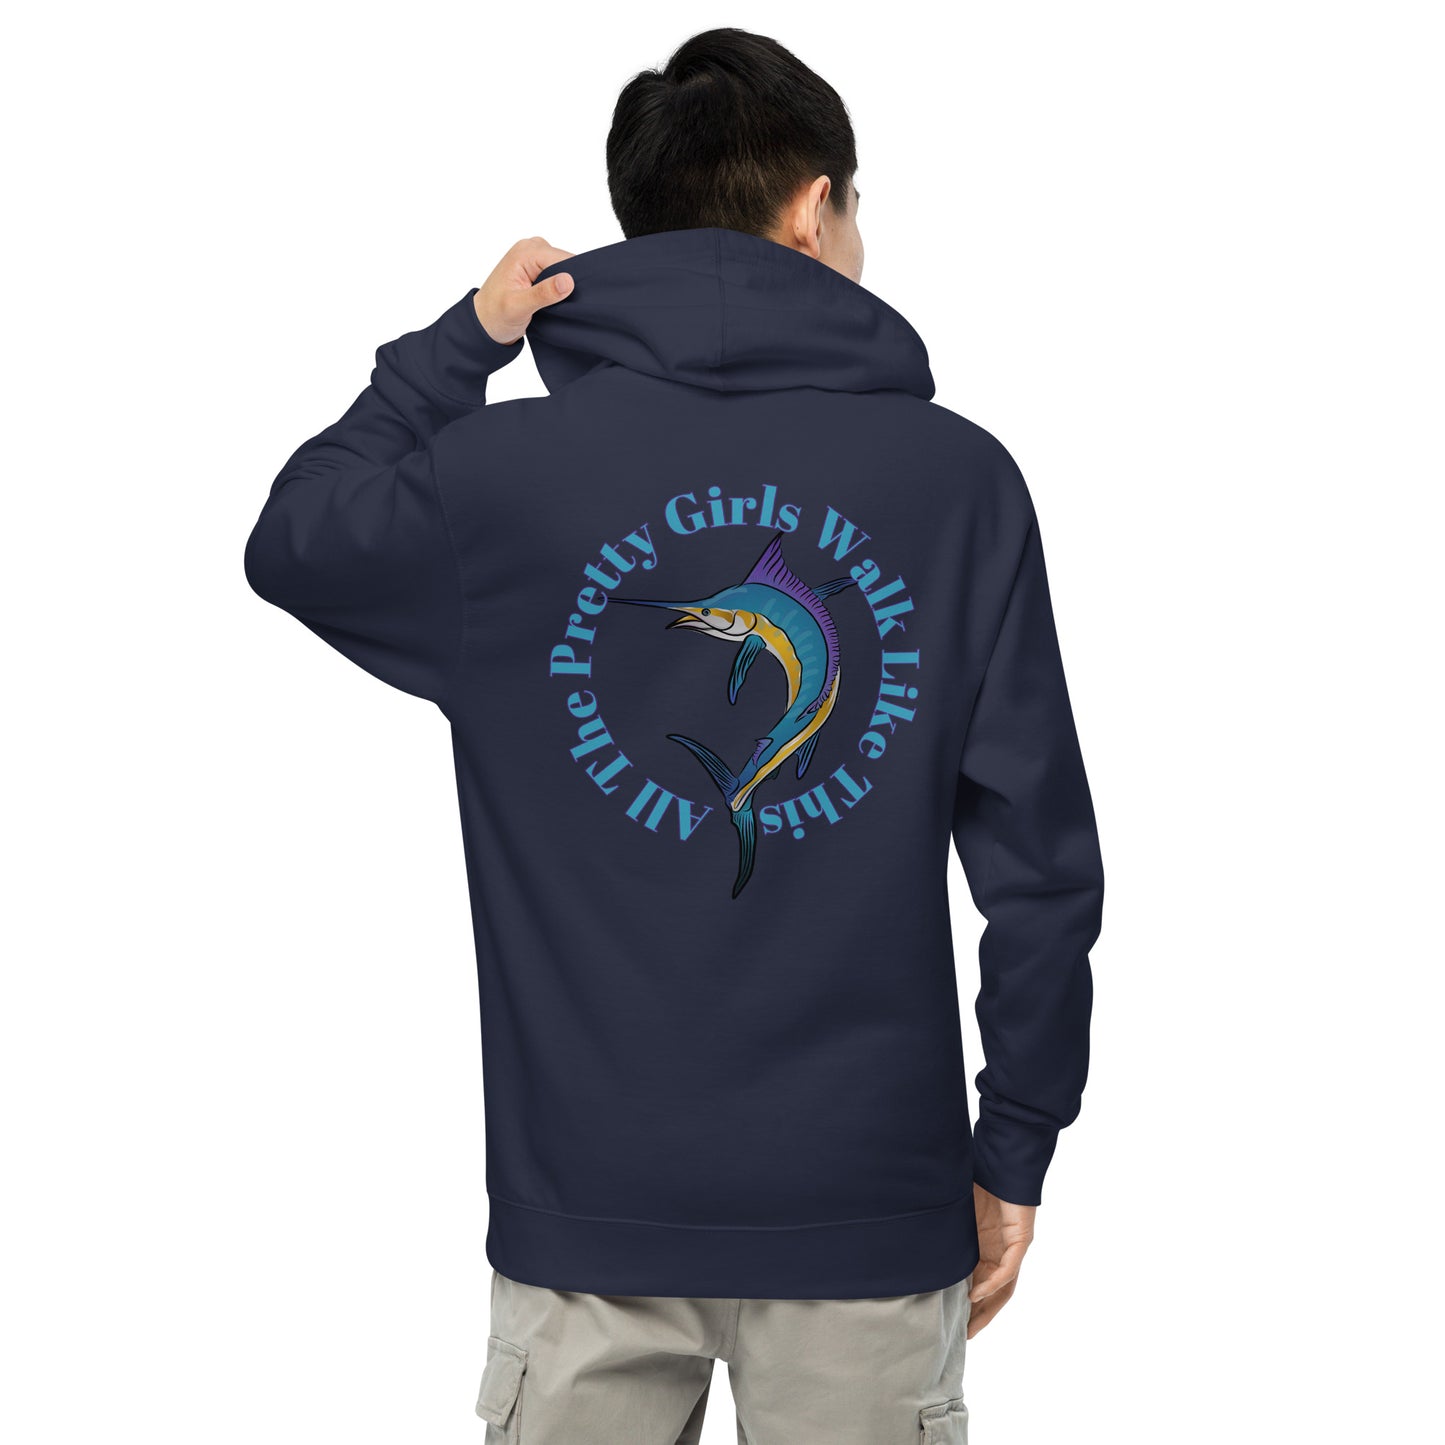 All The Pretty Girls Unisex midweight hoodie